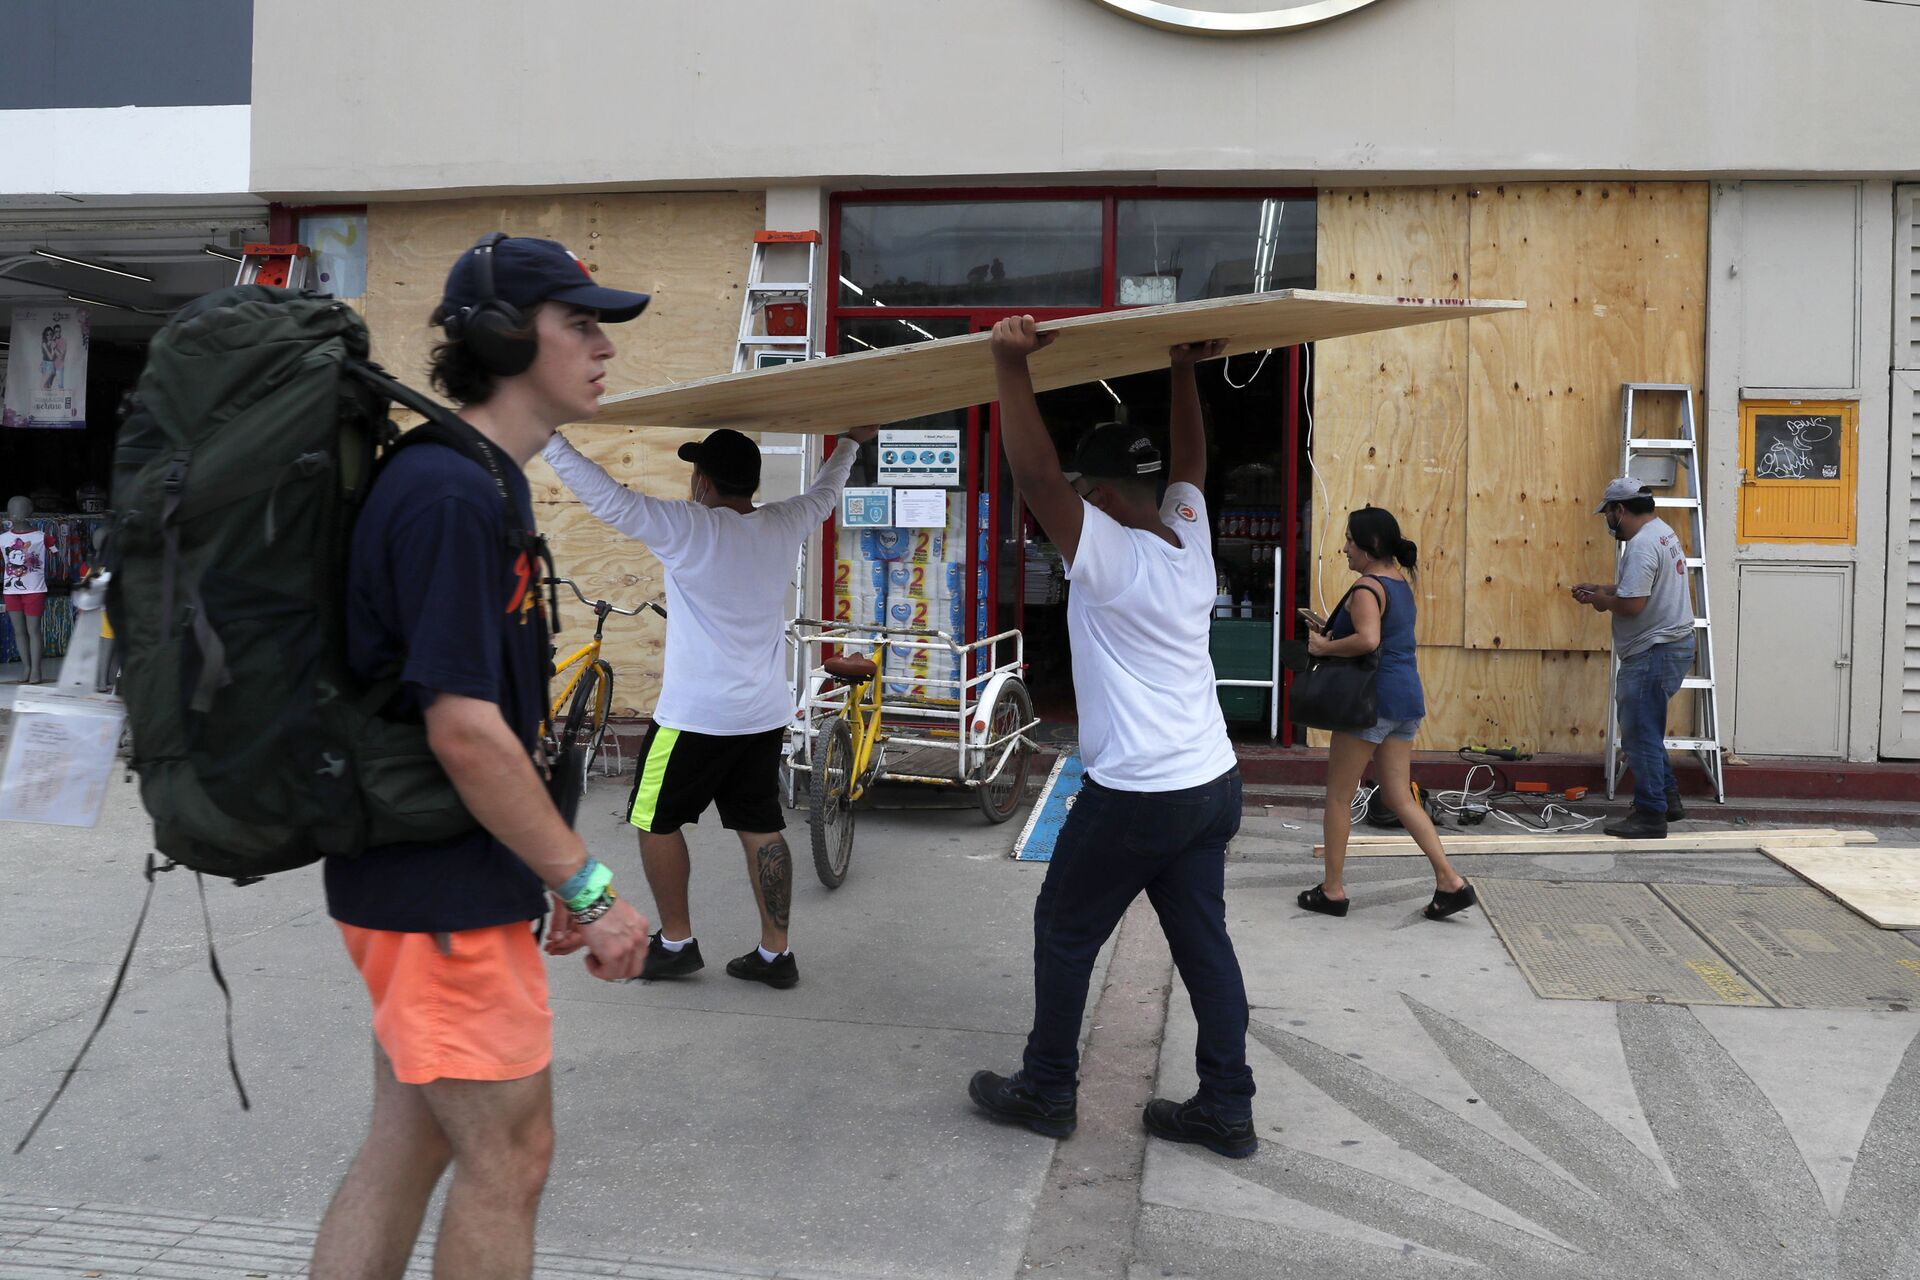 Workers cover shop windows with plywood in Tulum, Quintana Roo State, Mexico, Wednesday, Aug. 18, 2021. Residents and tourists along the Caribbean coast began making preparations for Grace, a storm that drenched Haiti and Jamaica and is now forecast to hit Mexico´s Yucatan peninsula like a hurricane early Thursday morning. - Sputnik International, 1920, 07.09.2021